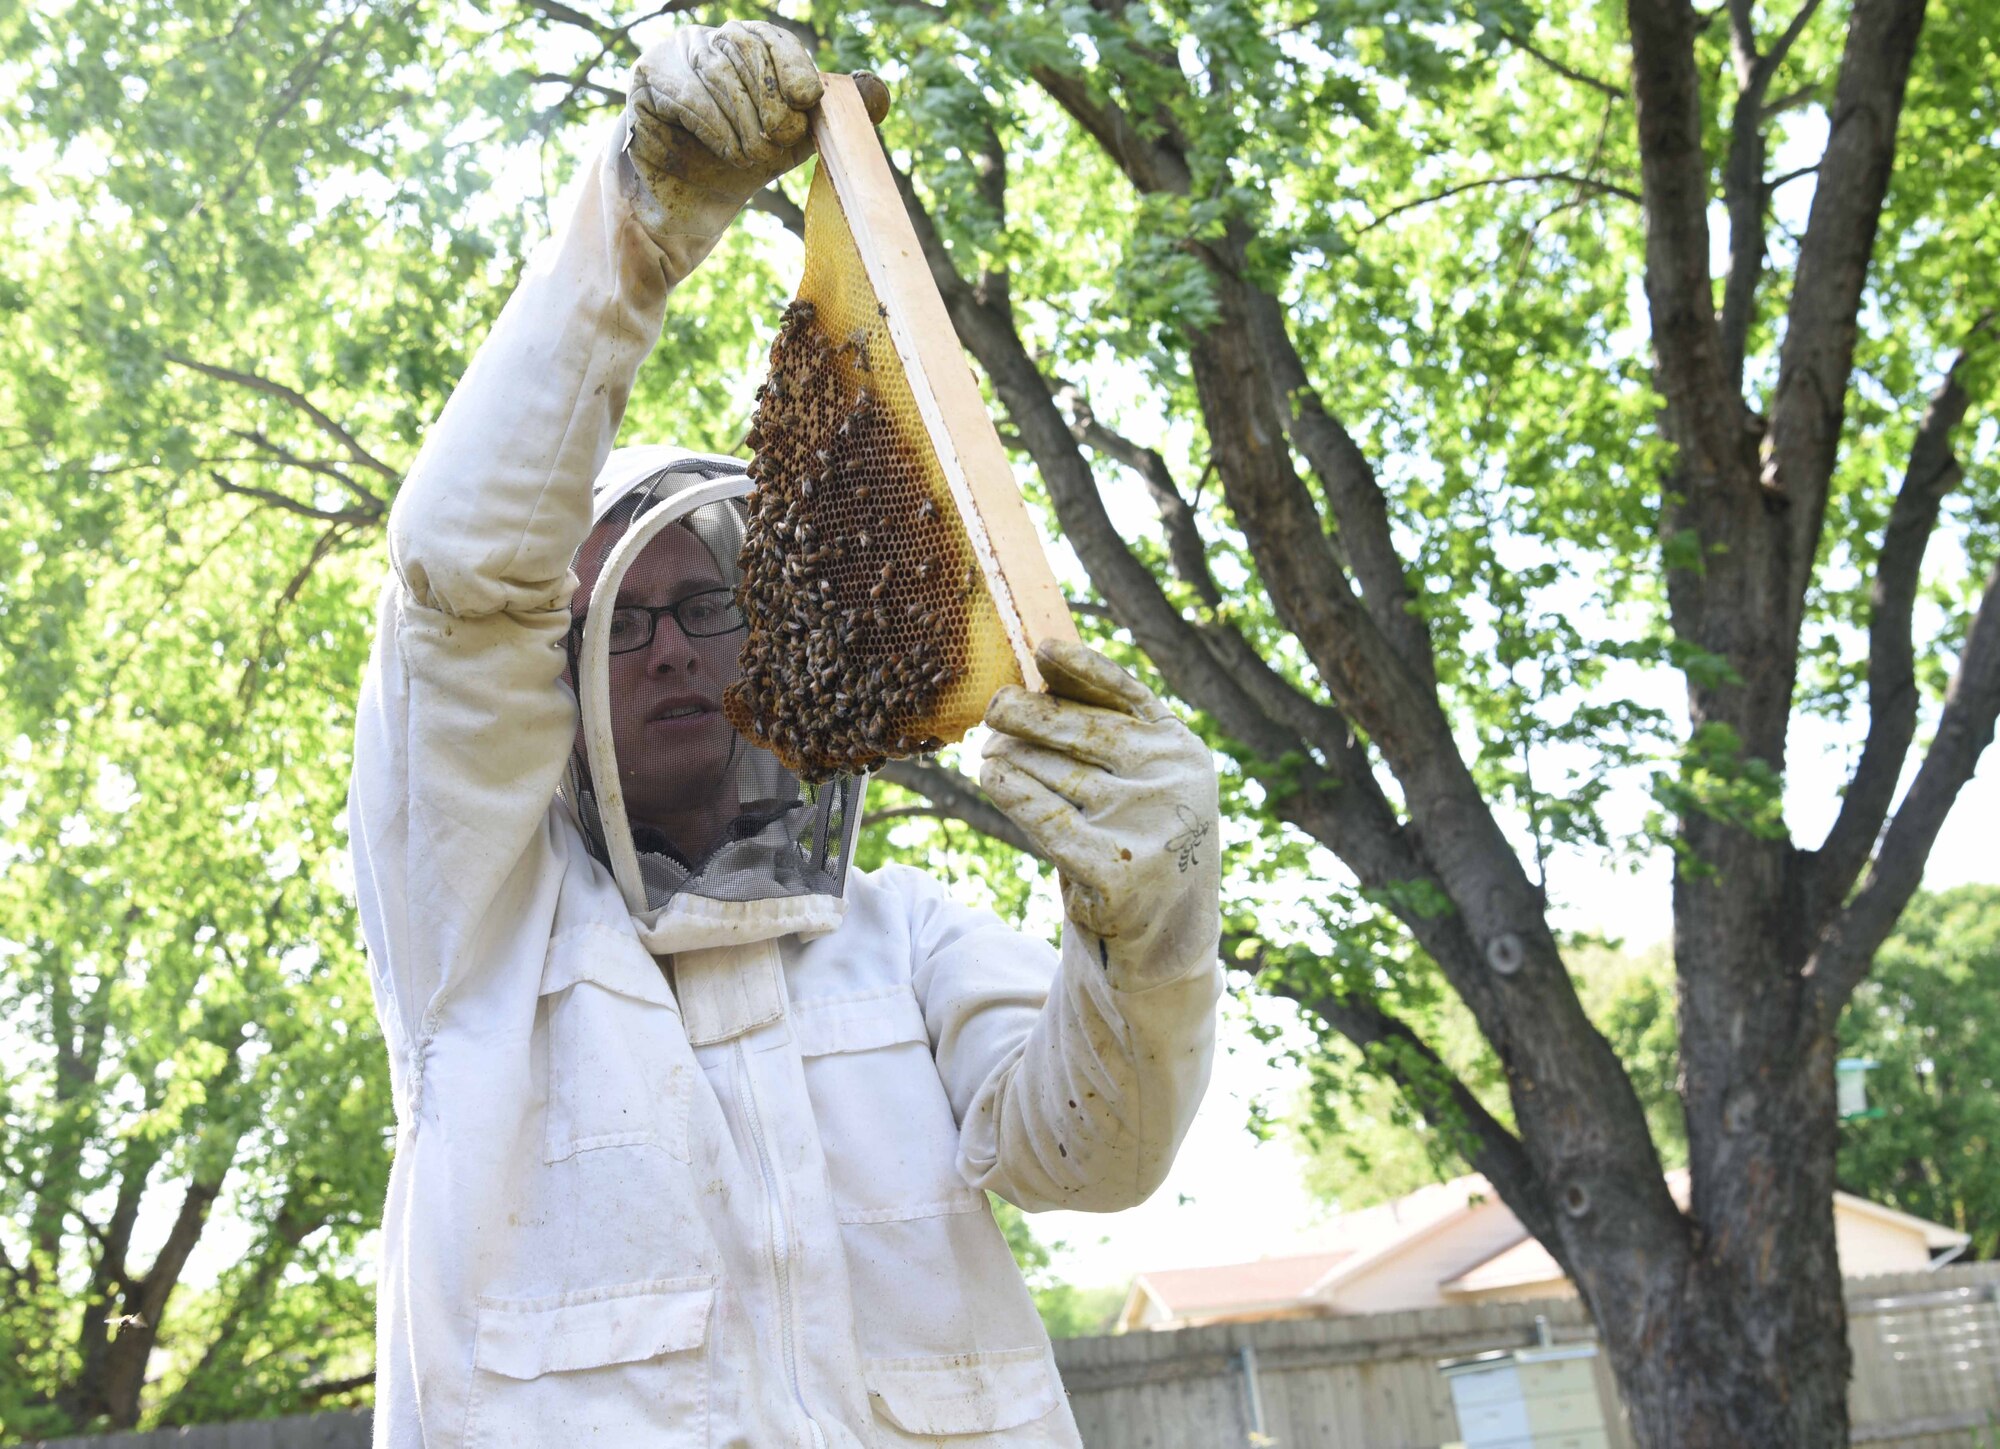 Tech. Sgt. Garrett Wright, 22nd Operations Support Squadron Survival Evasion Resistance and Escape and Personnel Recovery specialist, inspects one of his honeybee hives April 24, 2017, in Derby, Kan. Wright, who is an environmental science major, is interested in the impact honeybees and other insects have on the environment. (U.S. Air Force photo/Airman 1st Class Erin McClellan)